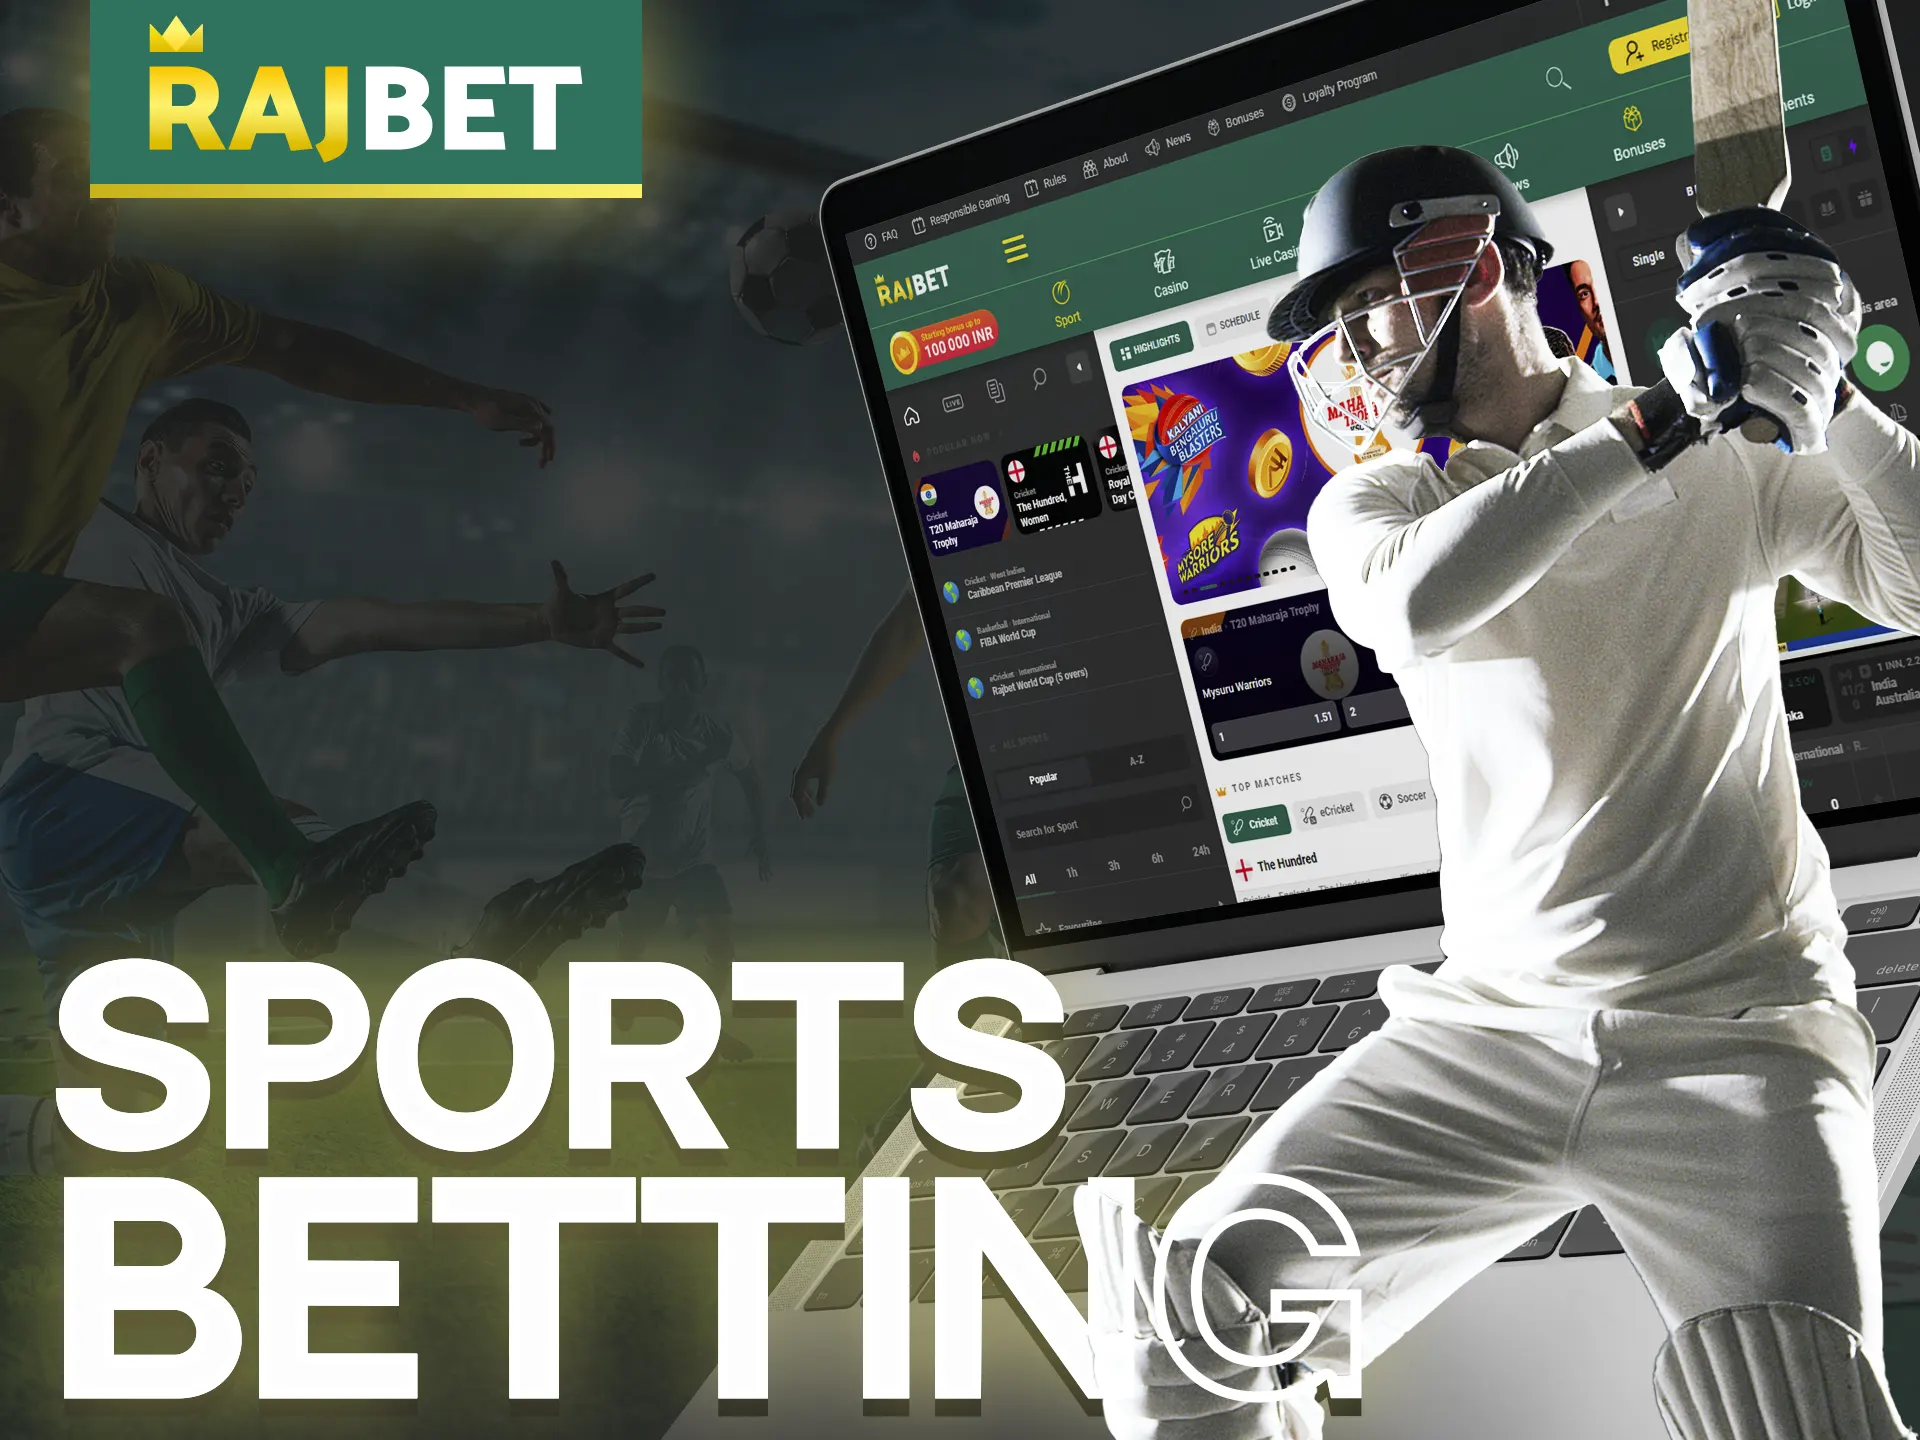 Rajbet users are given a huge range of opportunities to gamble endlessly on their favorite sports and esports events.